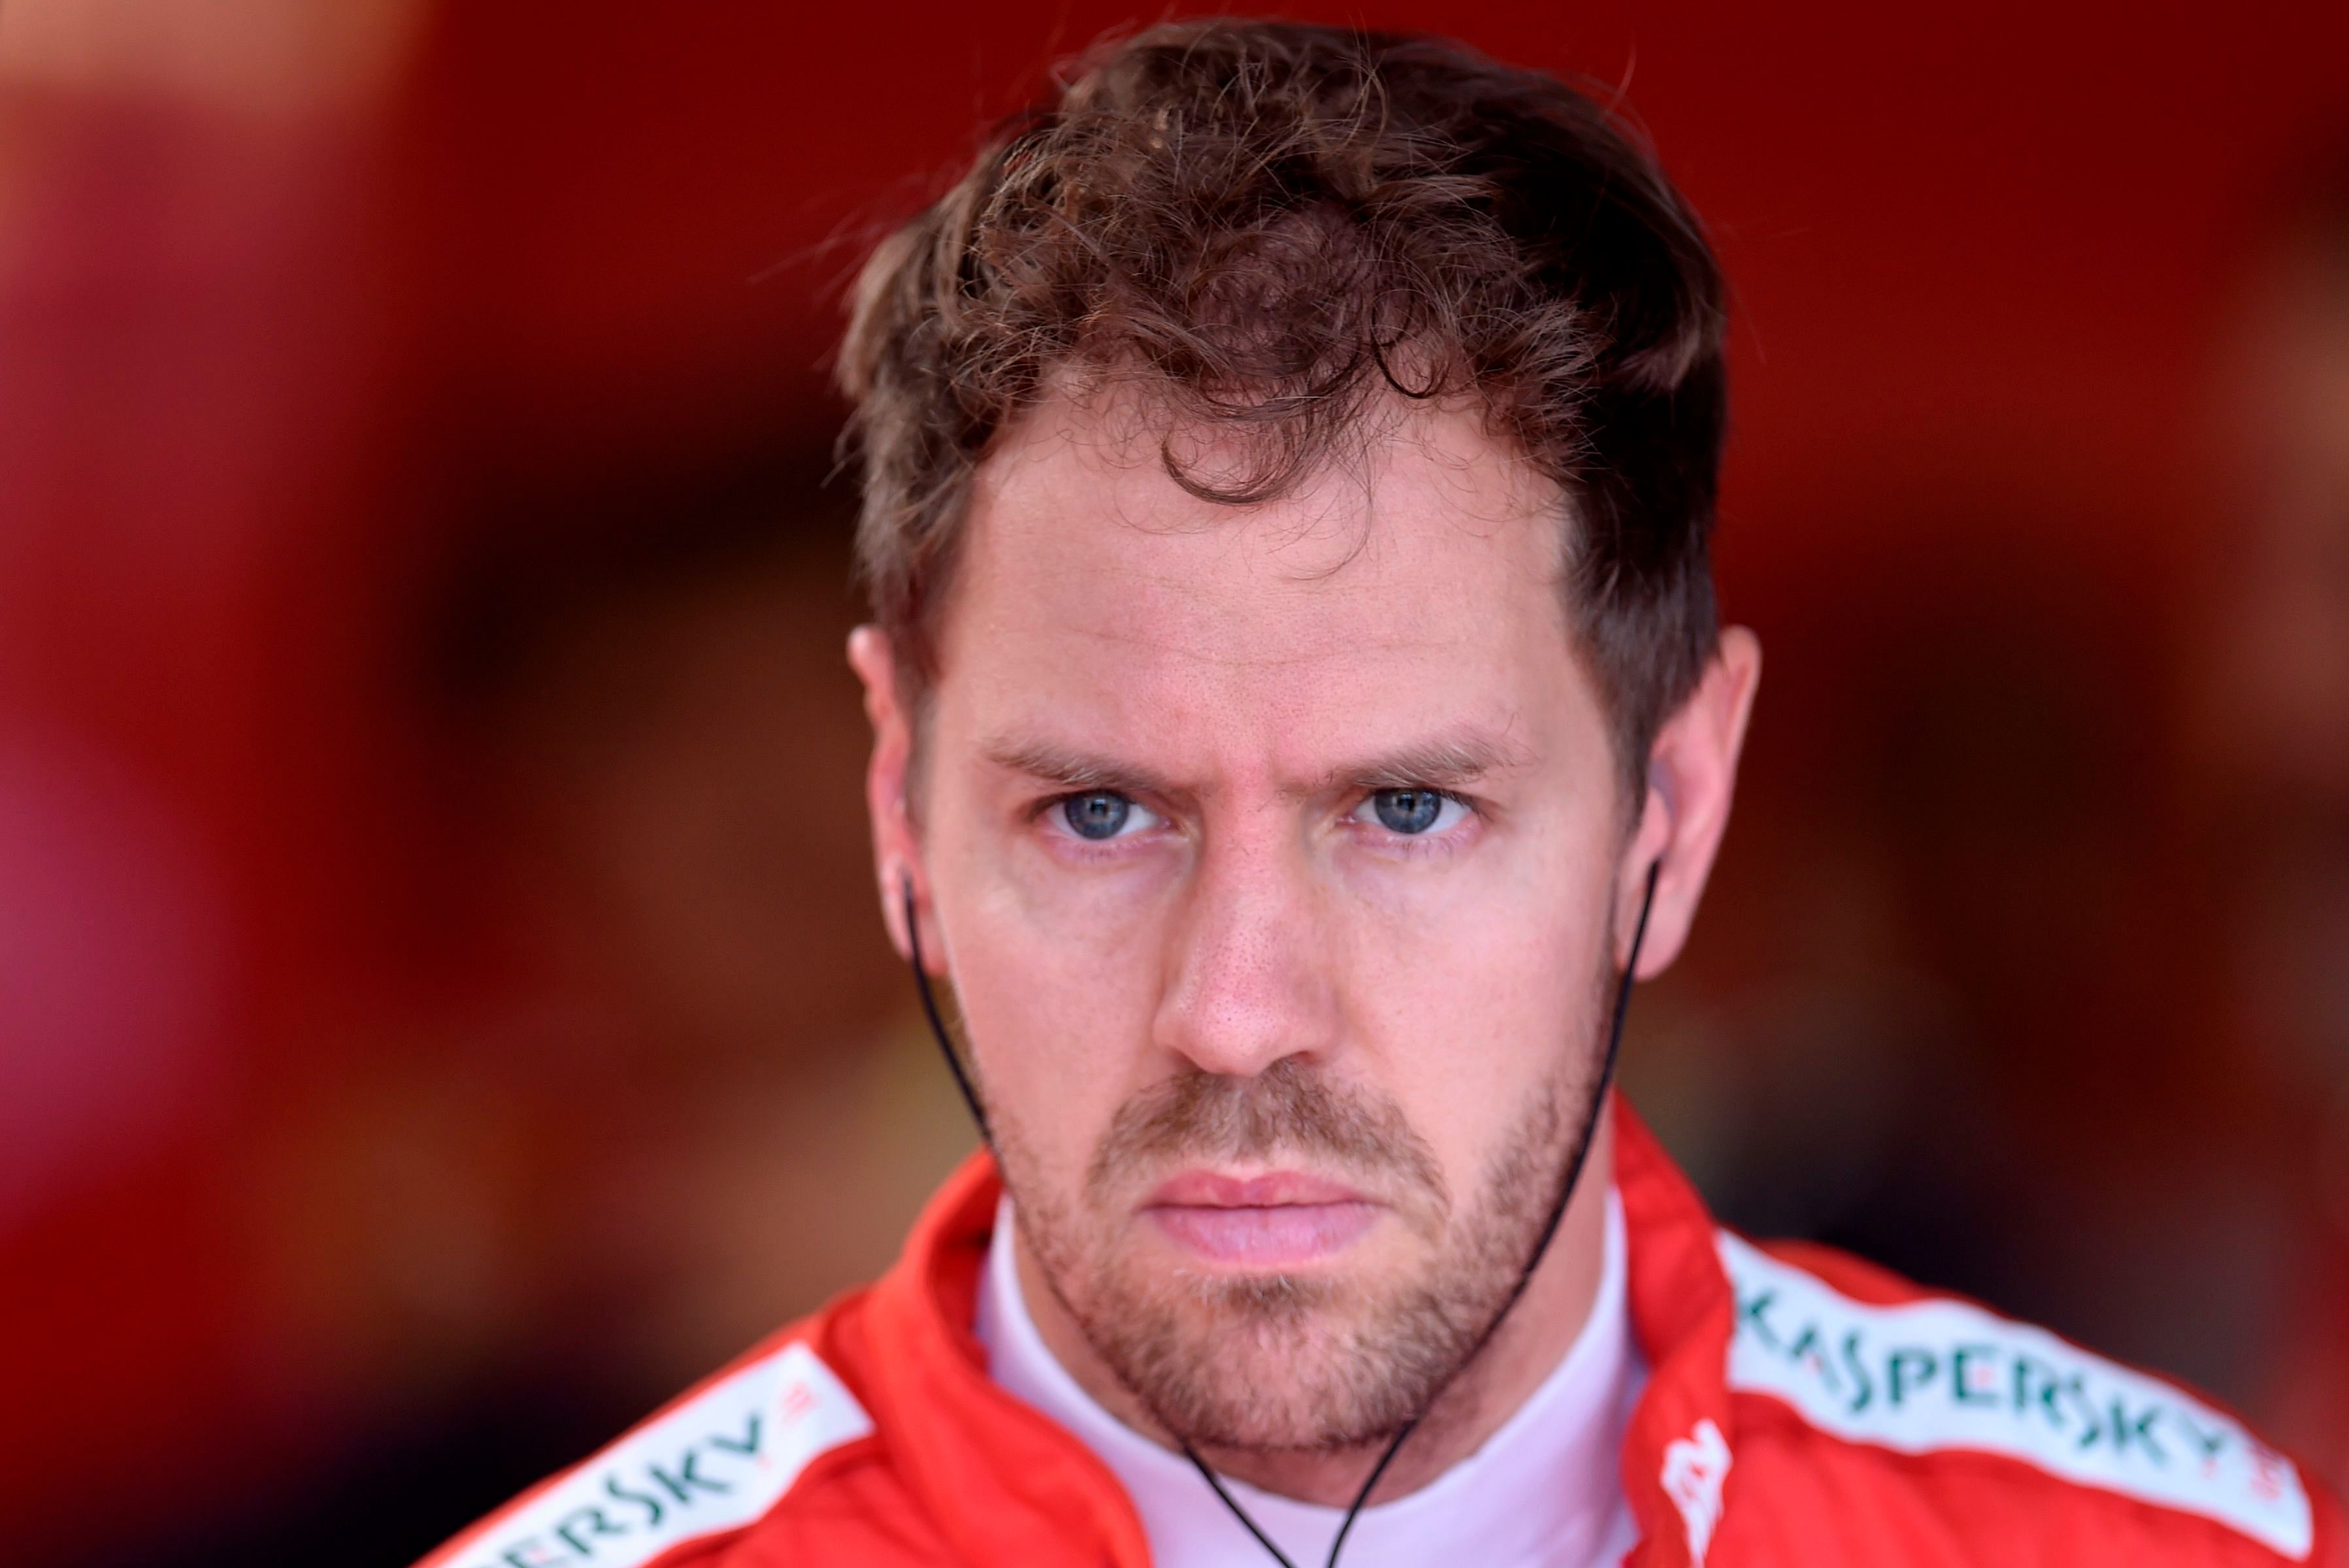 Ferrari said on Tuesday that Vettel, who won all his titles with Red Bull between 2010-13, would be leaving after six years with them. (Credit: AFP Photo)